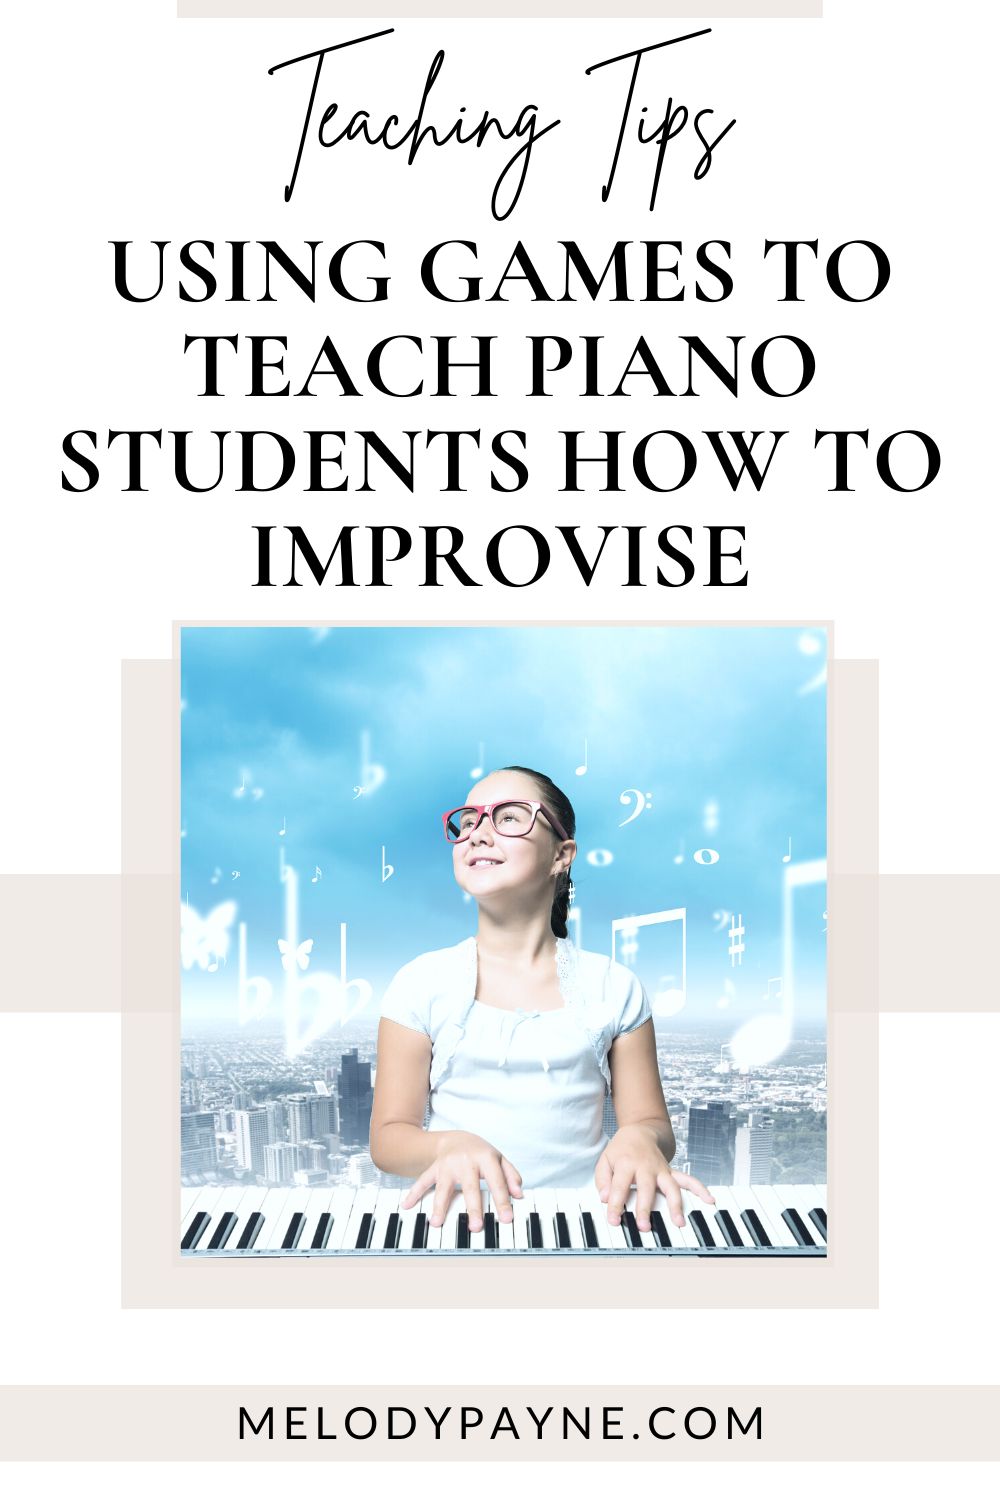 Using Games to Teach Piano Students How to Improvise